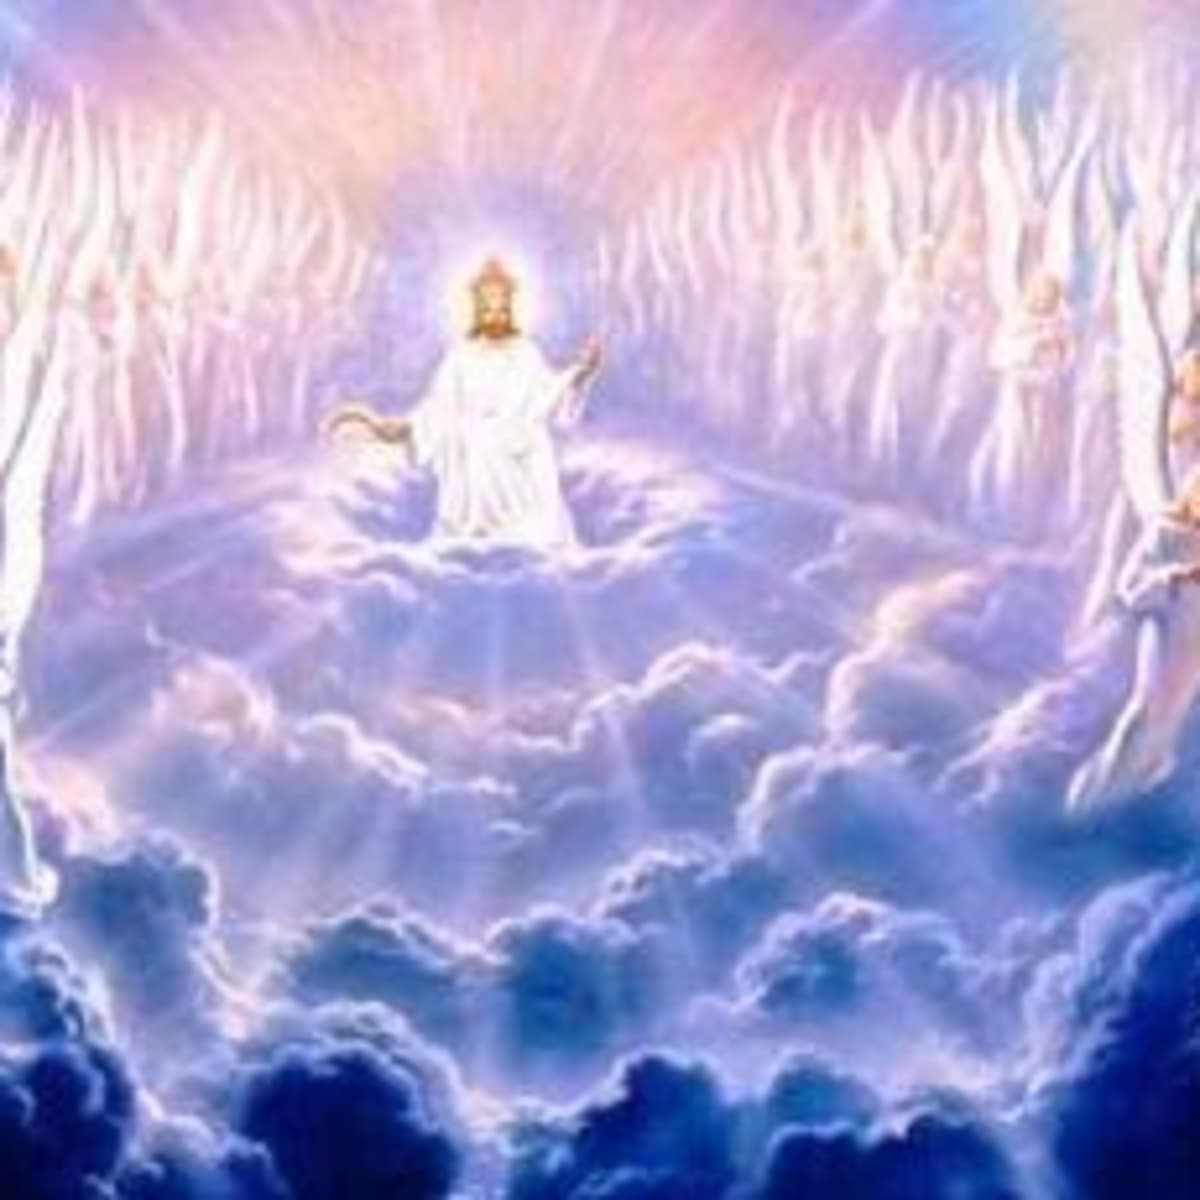 I had a Dream About the Second Coming of Jesus - HubPages